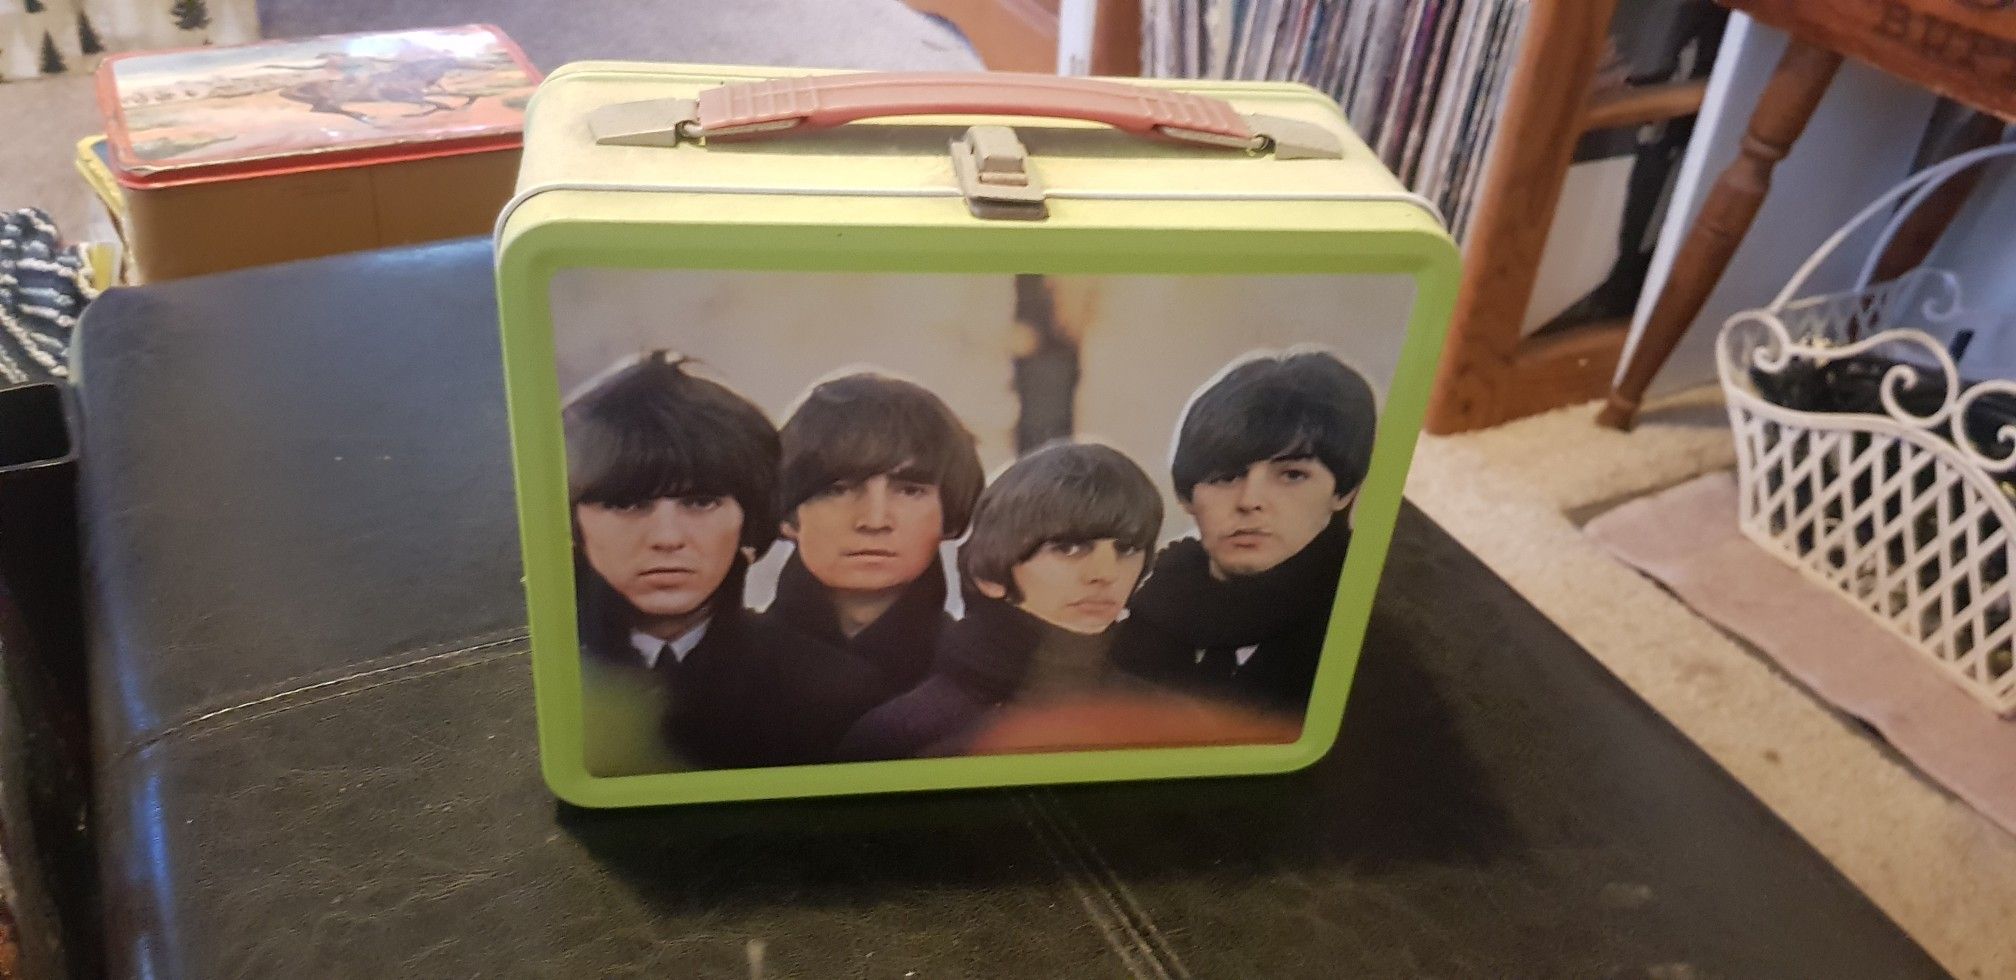 BEATLES LUNCH BOX SET OF 4